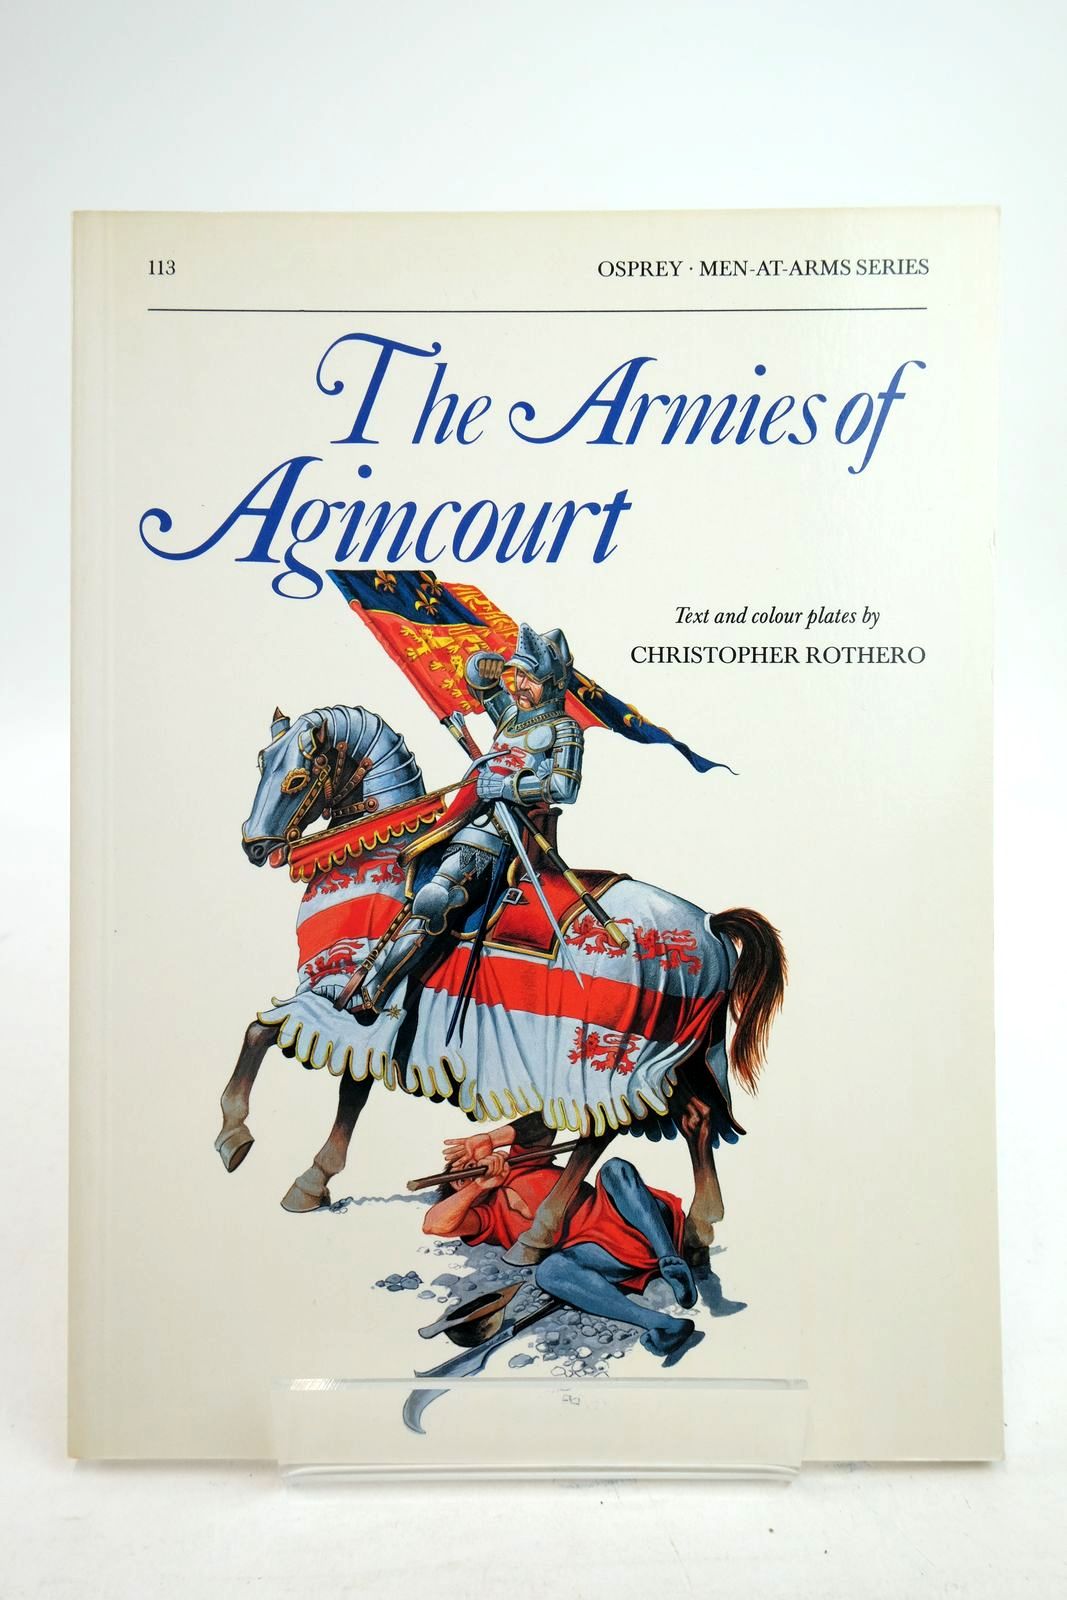 Photo of THE ARMIES OF AGINCOURT (MEN-AT-ARMS) written by Rothero, Christopher illustrated by Rothero, Christopher published by Osprey Publishing (STOCK CODE: 2134735)  for sale by Stella & Rose's Books